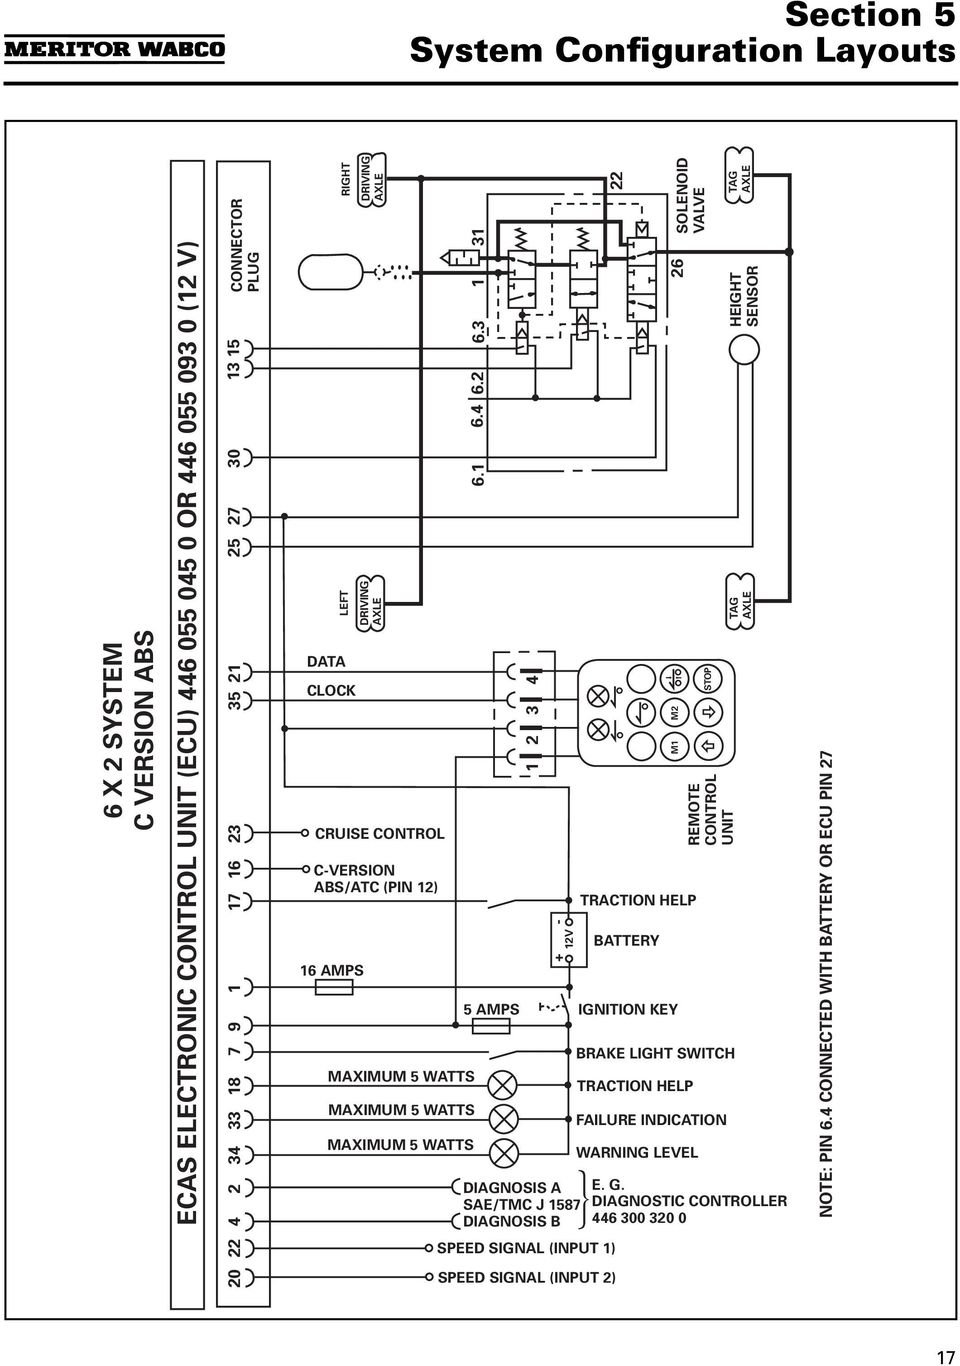 1 5 AMPS 1 2 3 4 + - 12V DIAGNOSIS A SAE/TMC J 1587 DIAGNOSIS B 22 SPEED SIGNAL (INPUT 1) SPEED SIGNAL (INPUT 2) BATTERY 26 M1 M2 TRACTION HELP IGNITION KEY SOLENOID VALVE TRACTION HELP